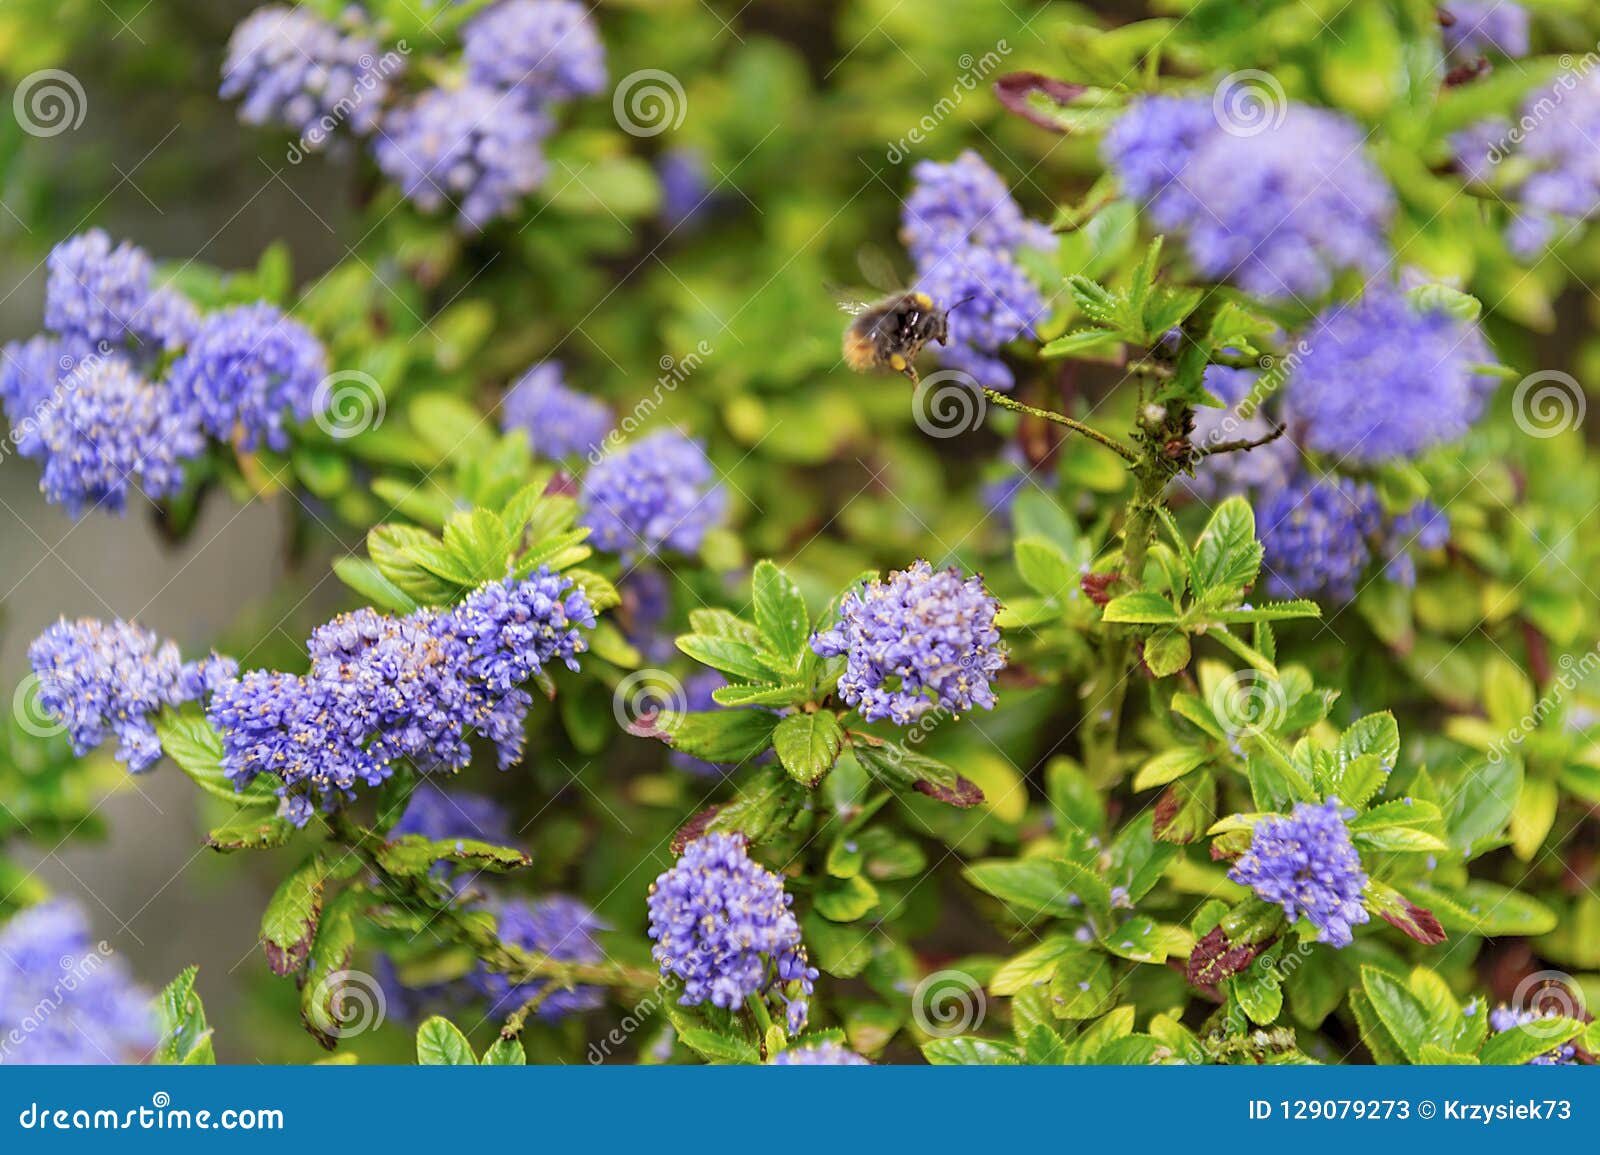 California Lilac Tree With Blue Flowers With Bee Stock Image Image Of Flower Green 129079273